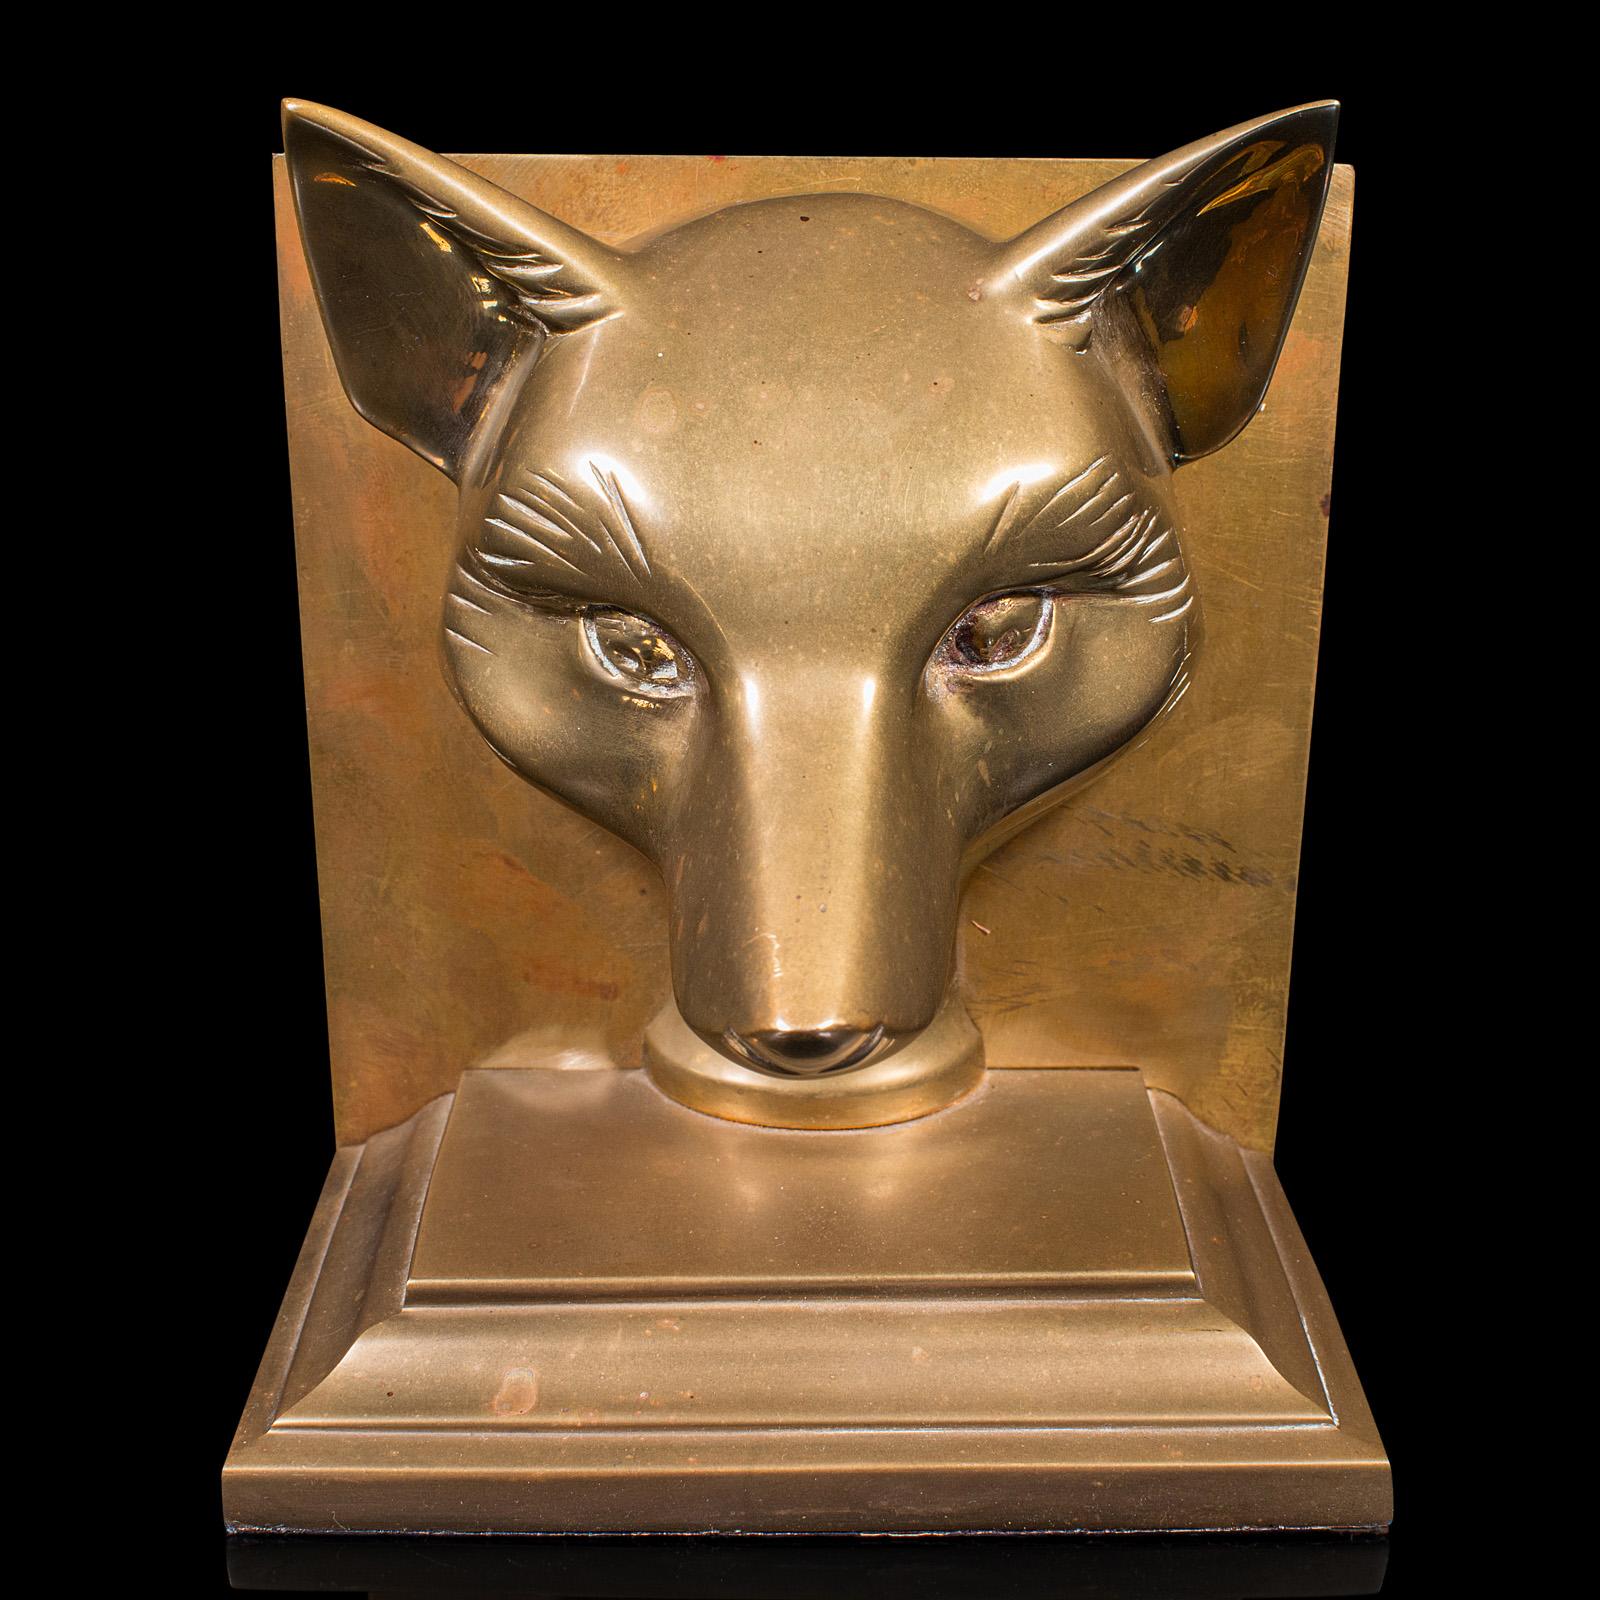 Pair Of Antique Fox Bookends, English, Brass, Decorative, Book Rest, Victorian For Sale 2